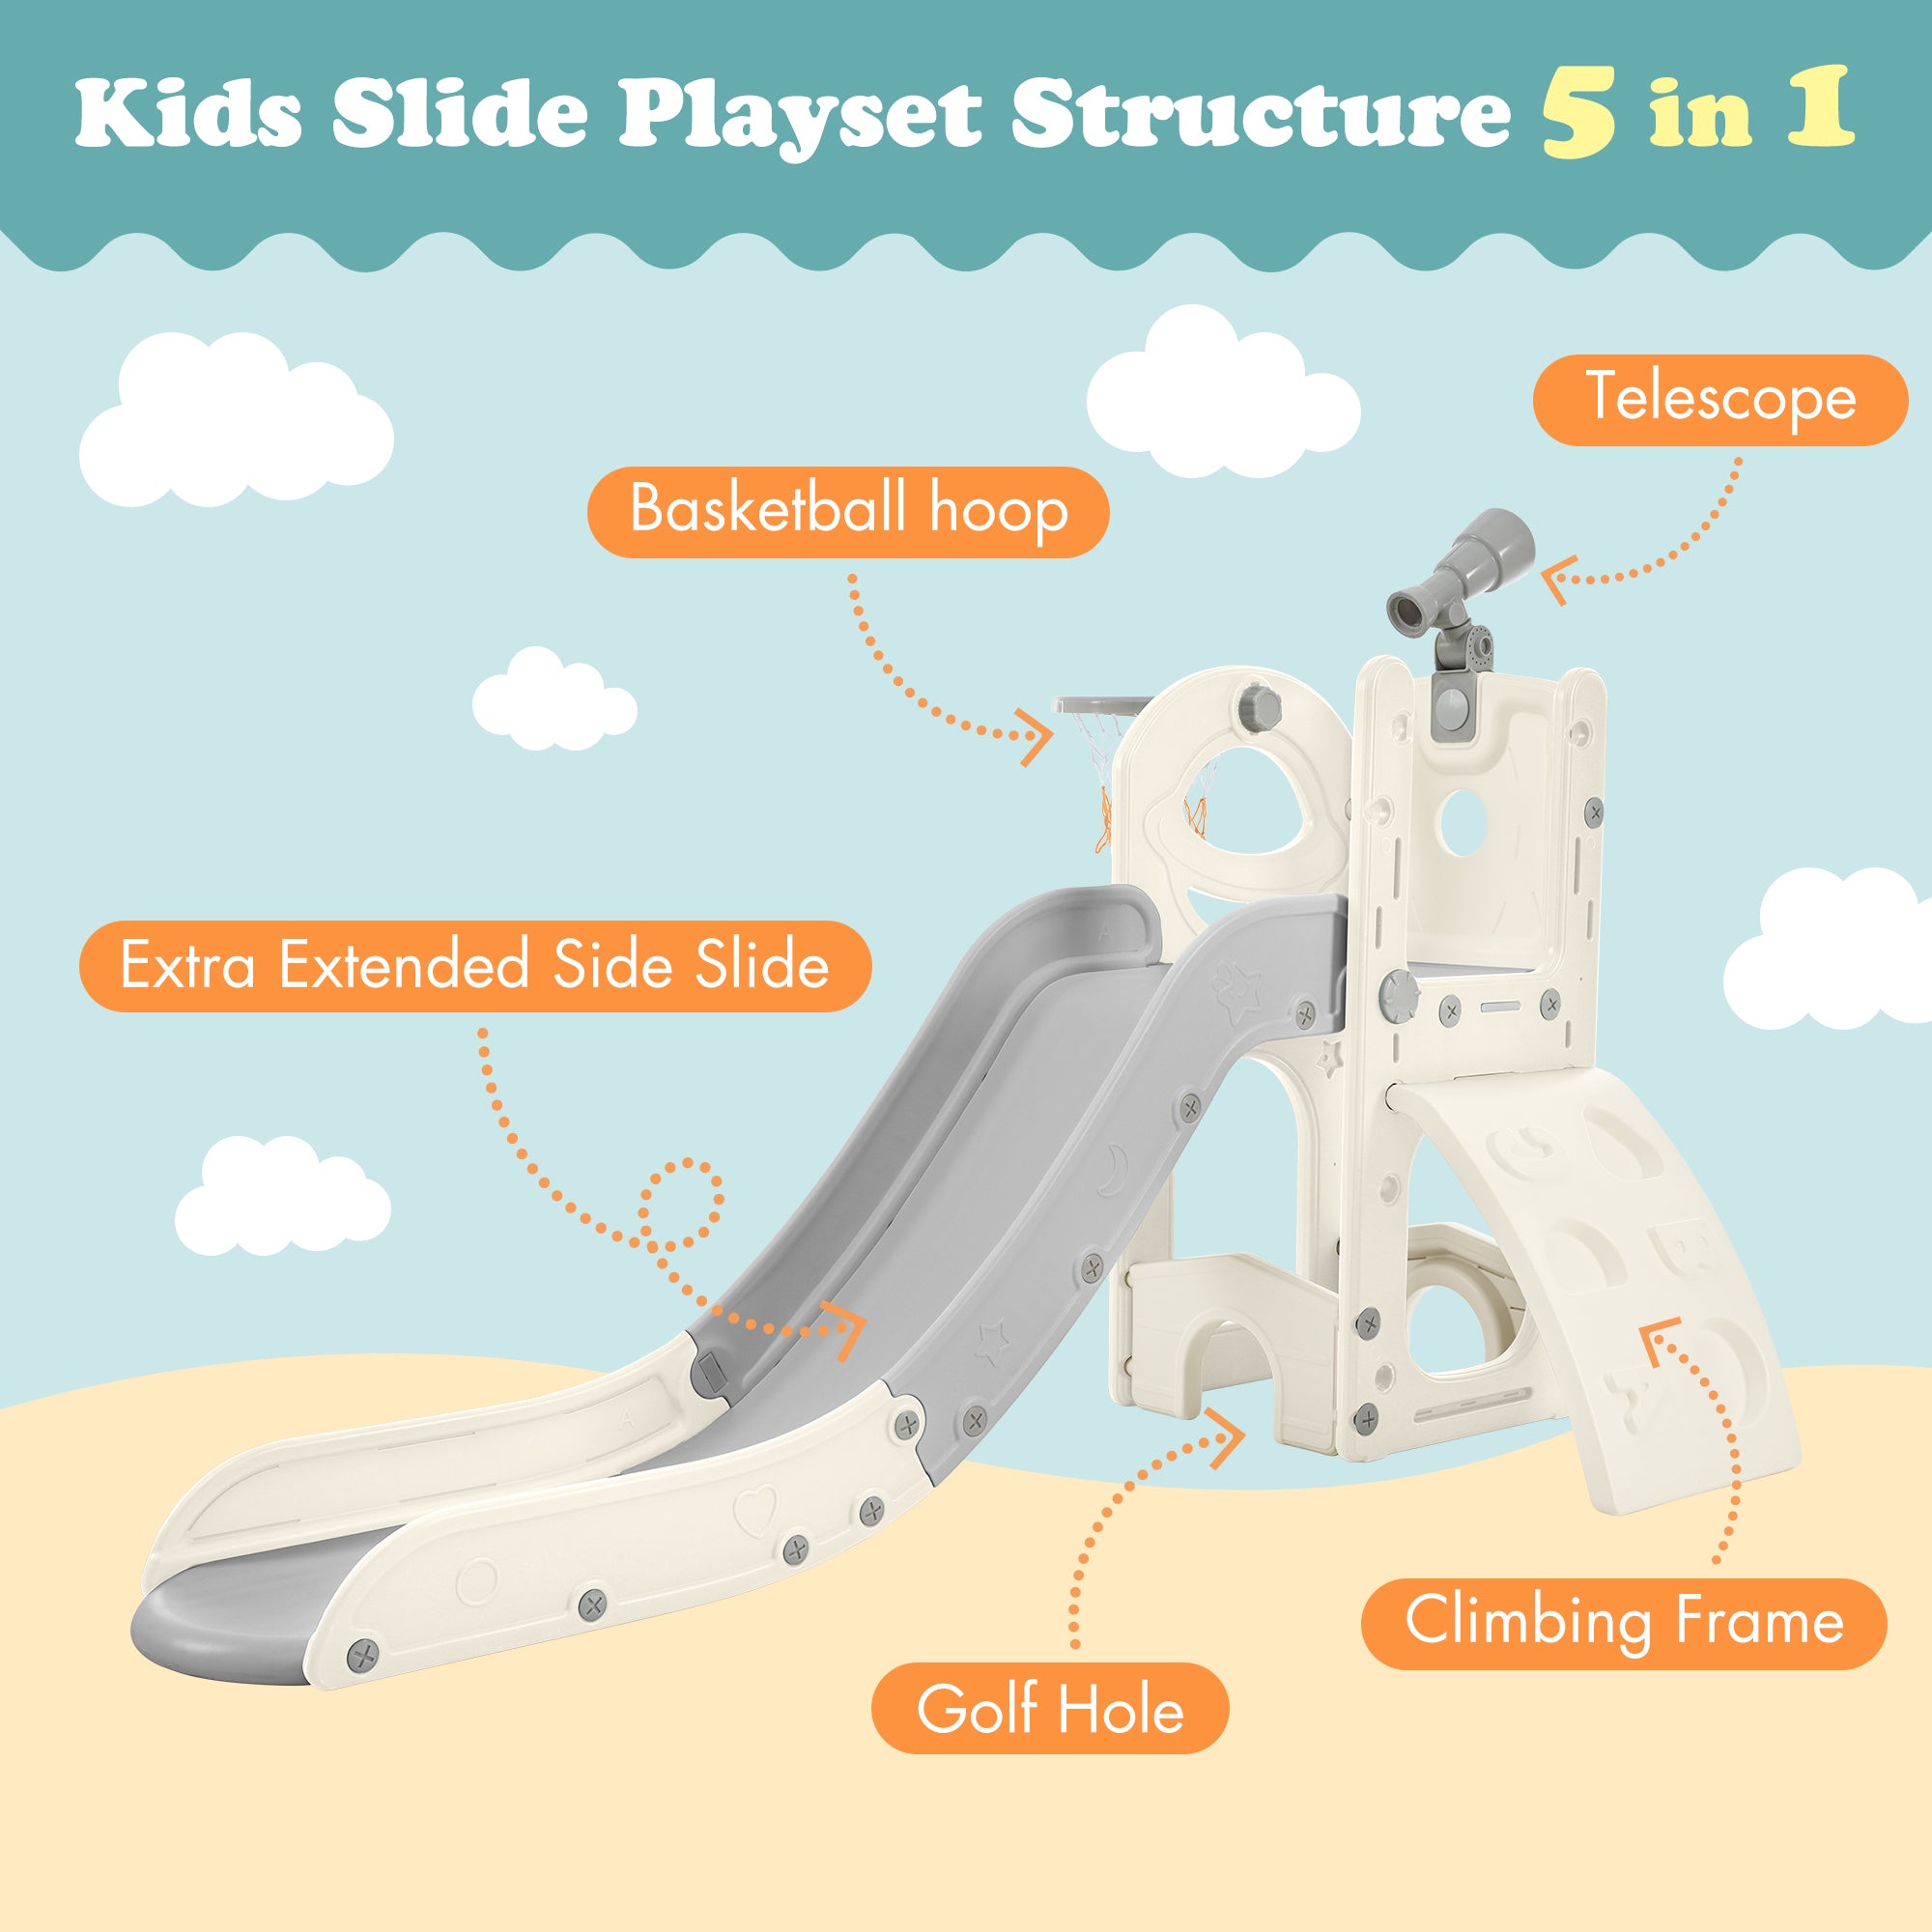 Kids Slide Playset Structure 5 in 1, Freestanding  Spaceship Set with Slide, Telescope and Basketball Hoop, Golf Holes for Toddlers, Kids Climbers Playground